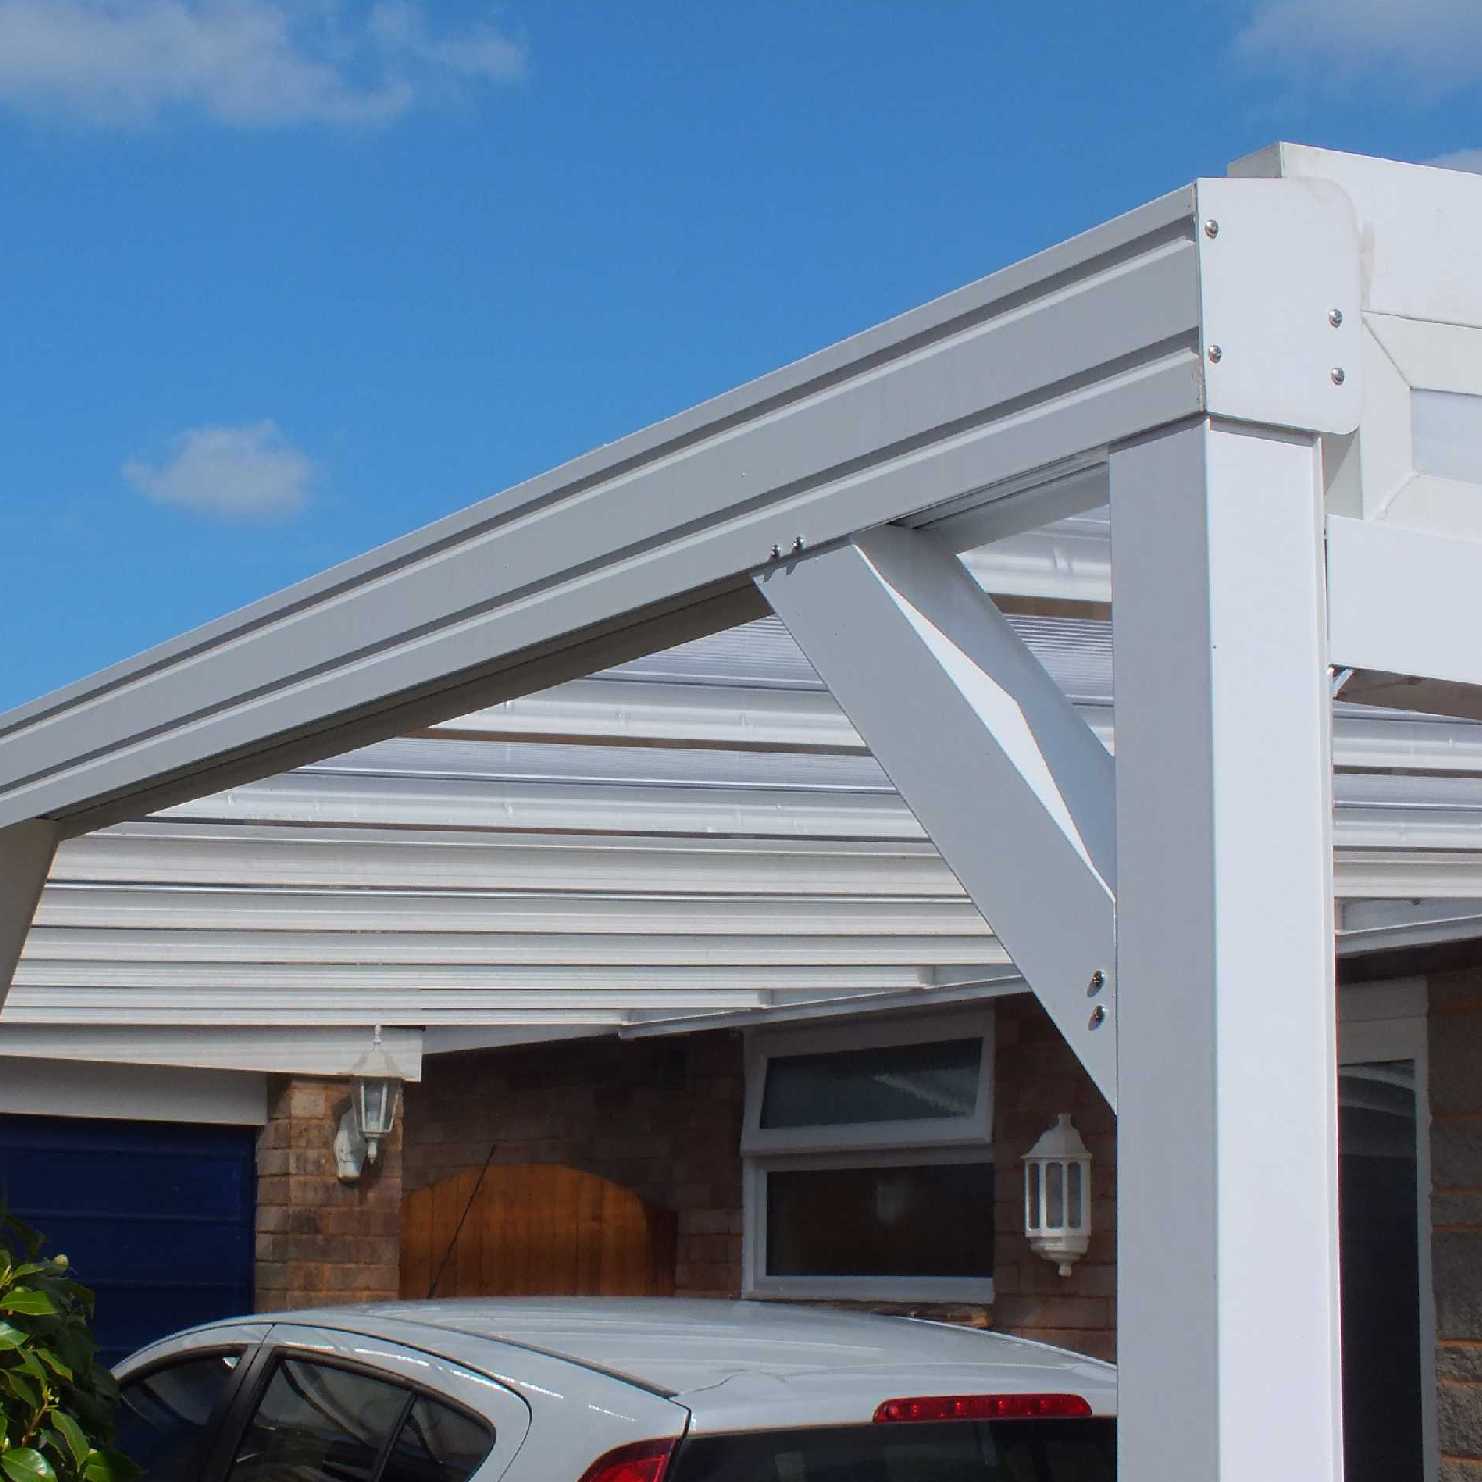 Buy Omega Smart Lean-To Canopy, White with 16mm Polycarbonate Glazing - 2.1m (W) x 3.0m (P), (2) Supporting Posts online today